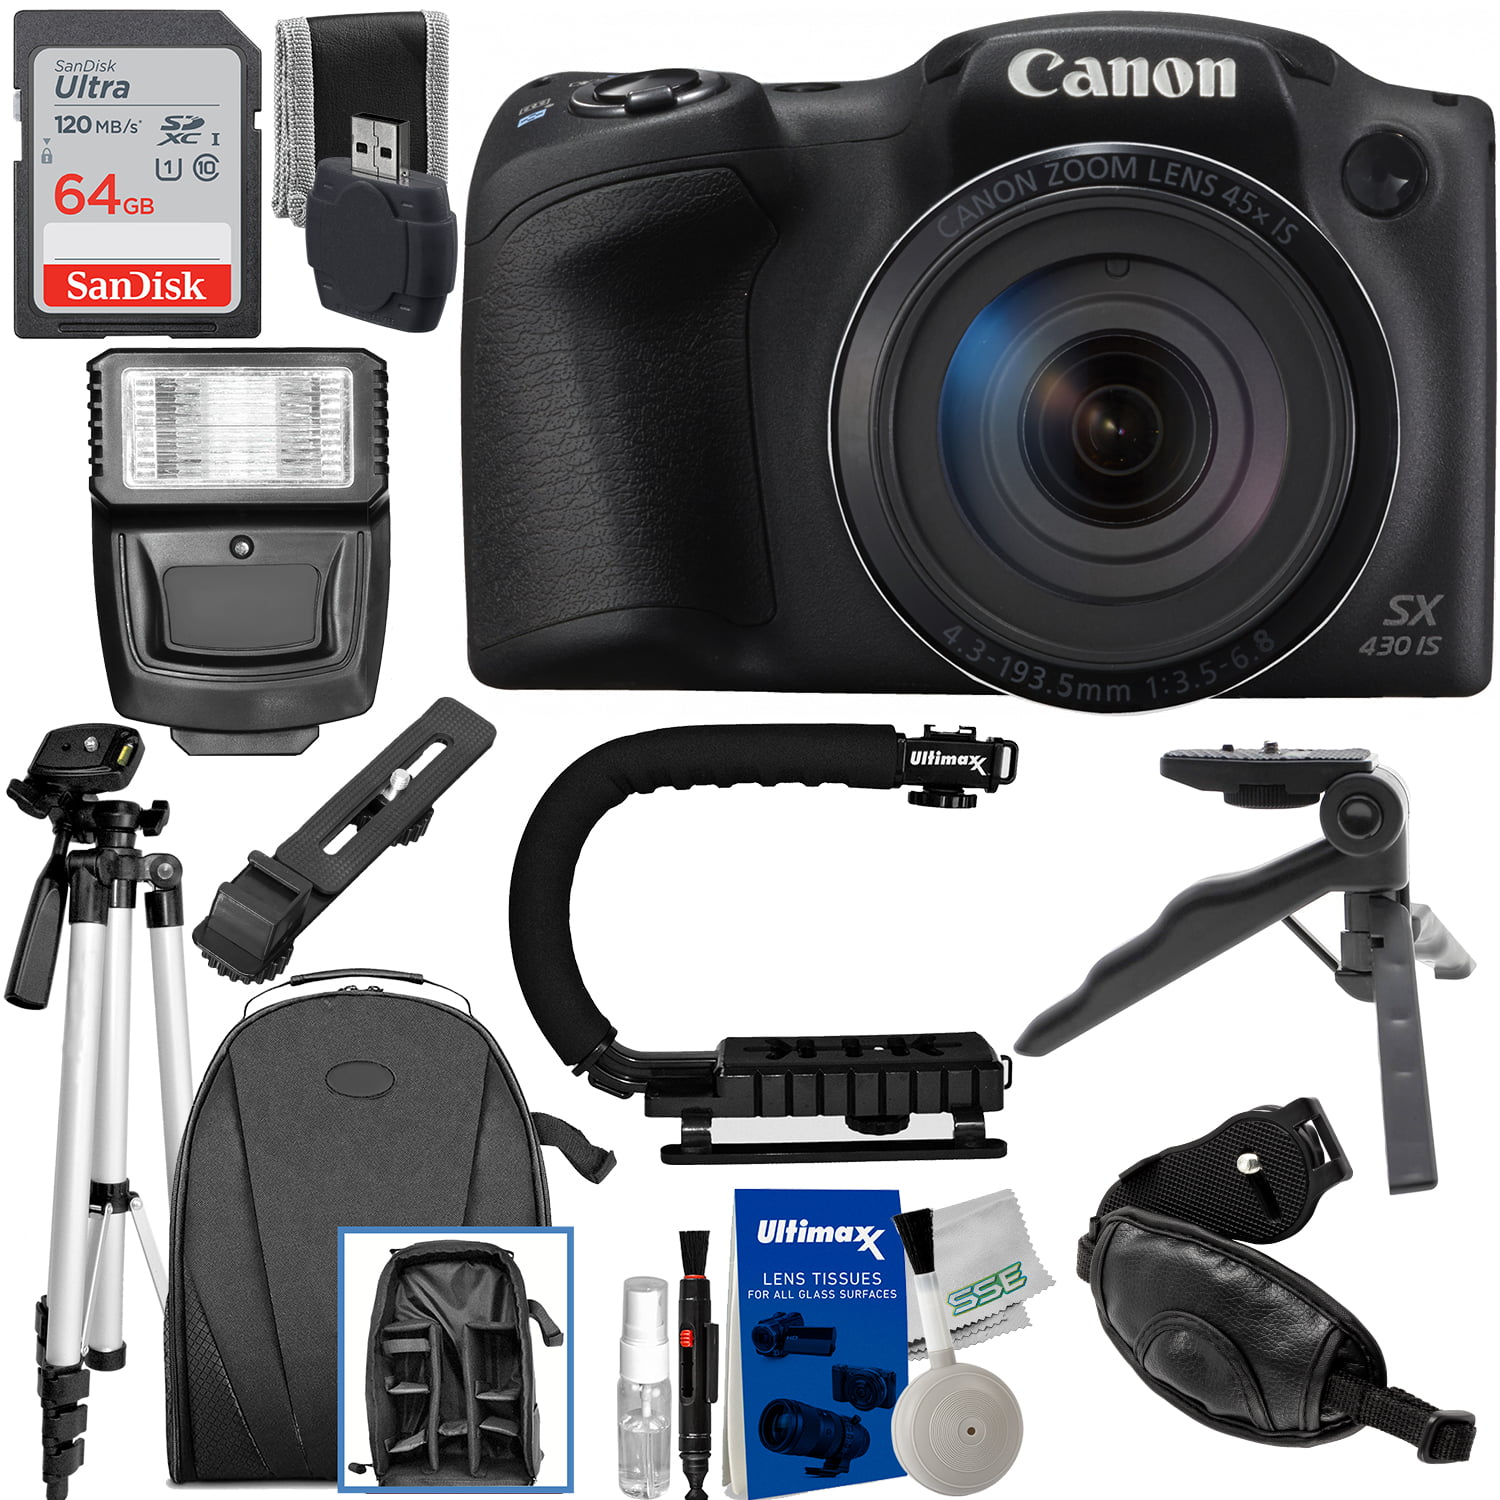 Canon PowerShot SX430 IS 20 MP Digital Camera (Black) with Essential  Accessory Bundle: SanDisk Ultra 64GB SDXC, Water Resistant Backpack,  Lightweight